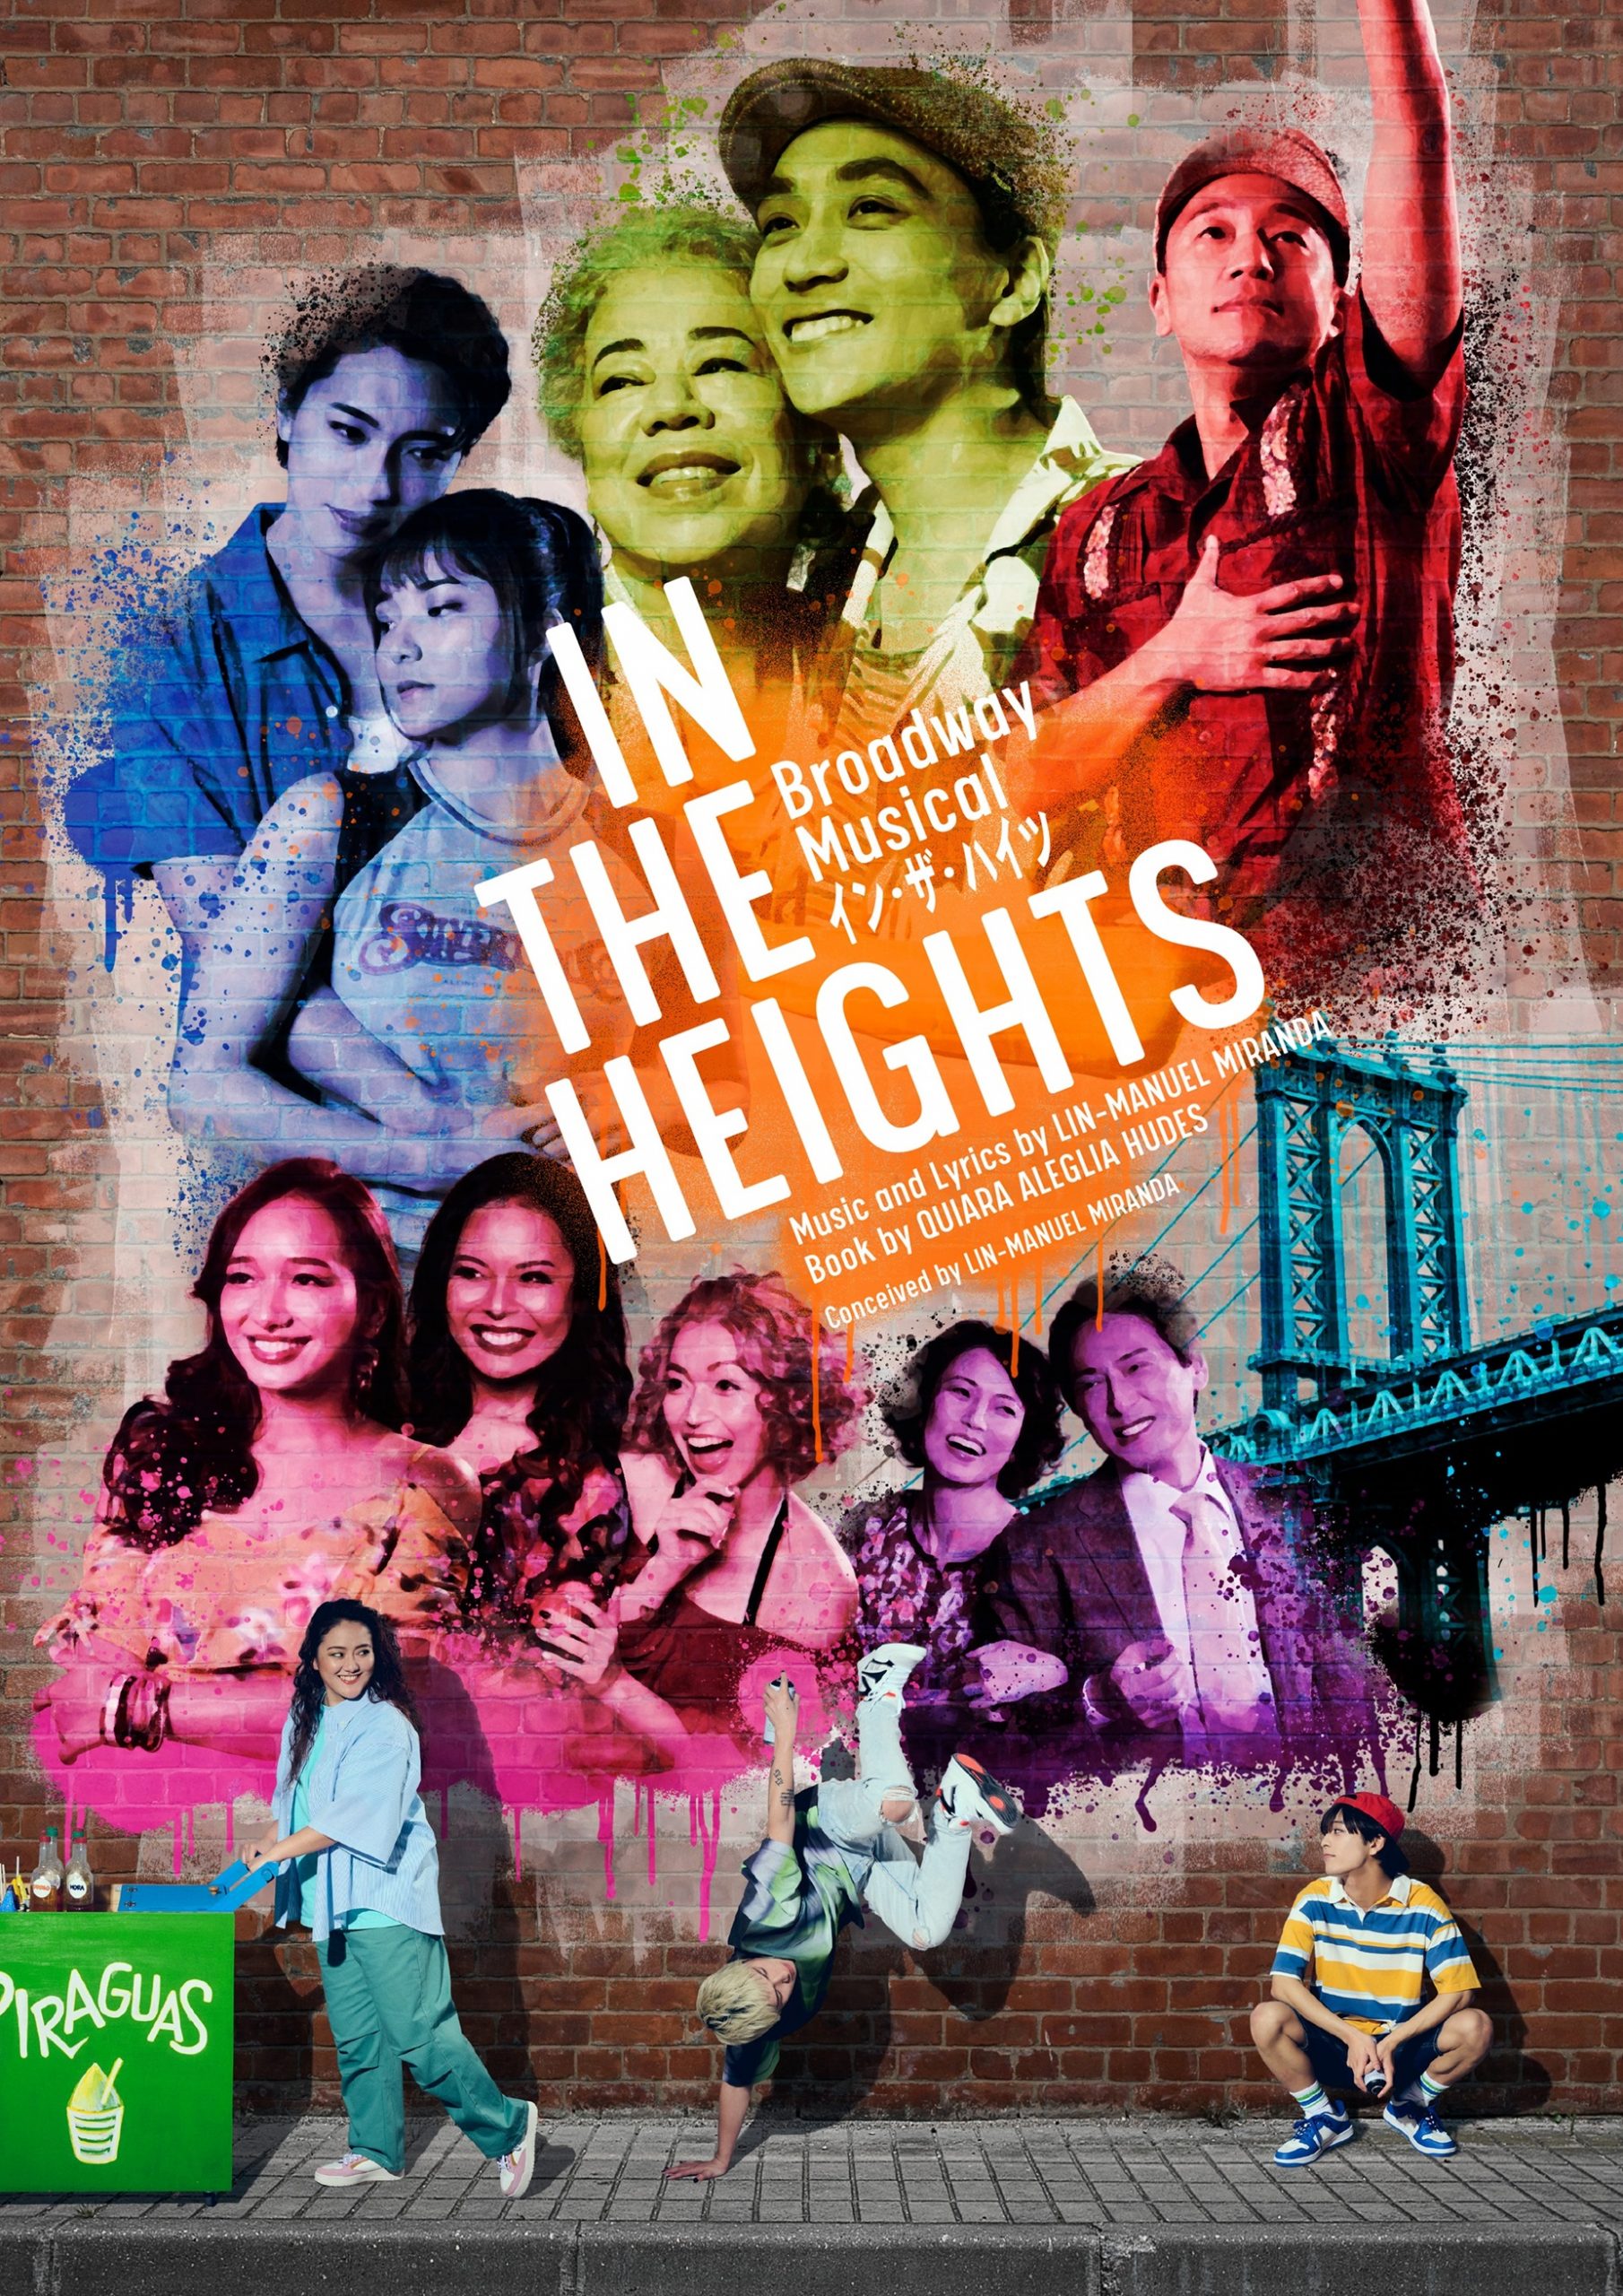 “Micro”出演、Broadway Musical 『IN THE HEIGHTS イン・ザ・ハイツ』 Def Tech Surf Club会員様限定チケット先行抽選受付開始！